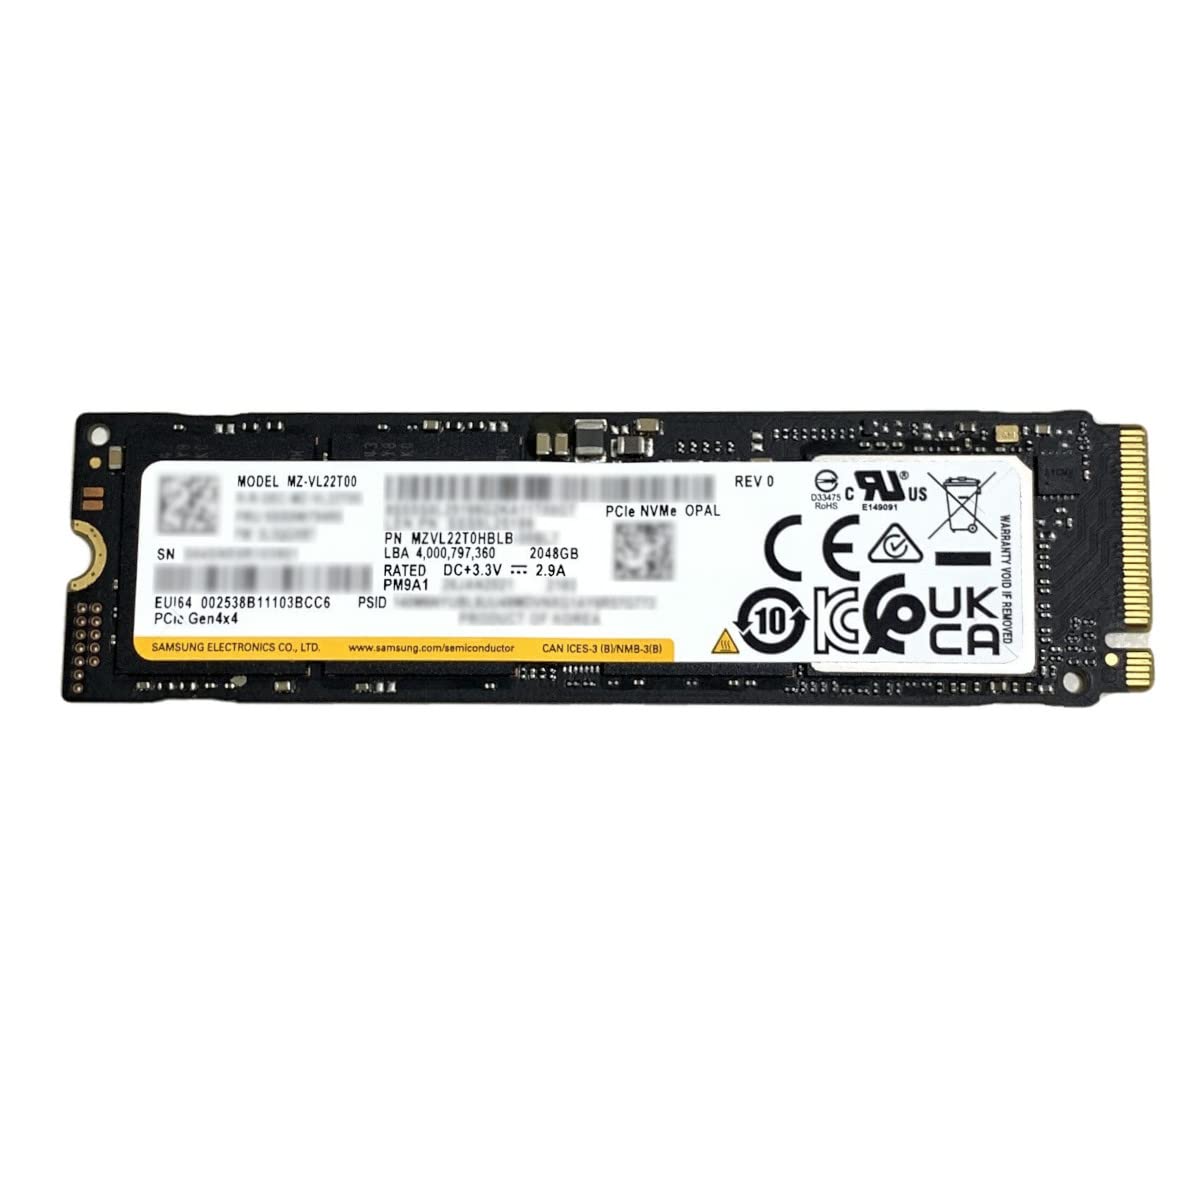 Samsung SSD 2TB PM9A1 M.2 2280 80mm MZVL22T0HBLB NVMe PCIe 4.0 Solid State Drive for Dell HP Lenovo Laptop Desktop Ultrabook